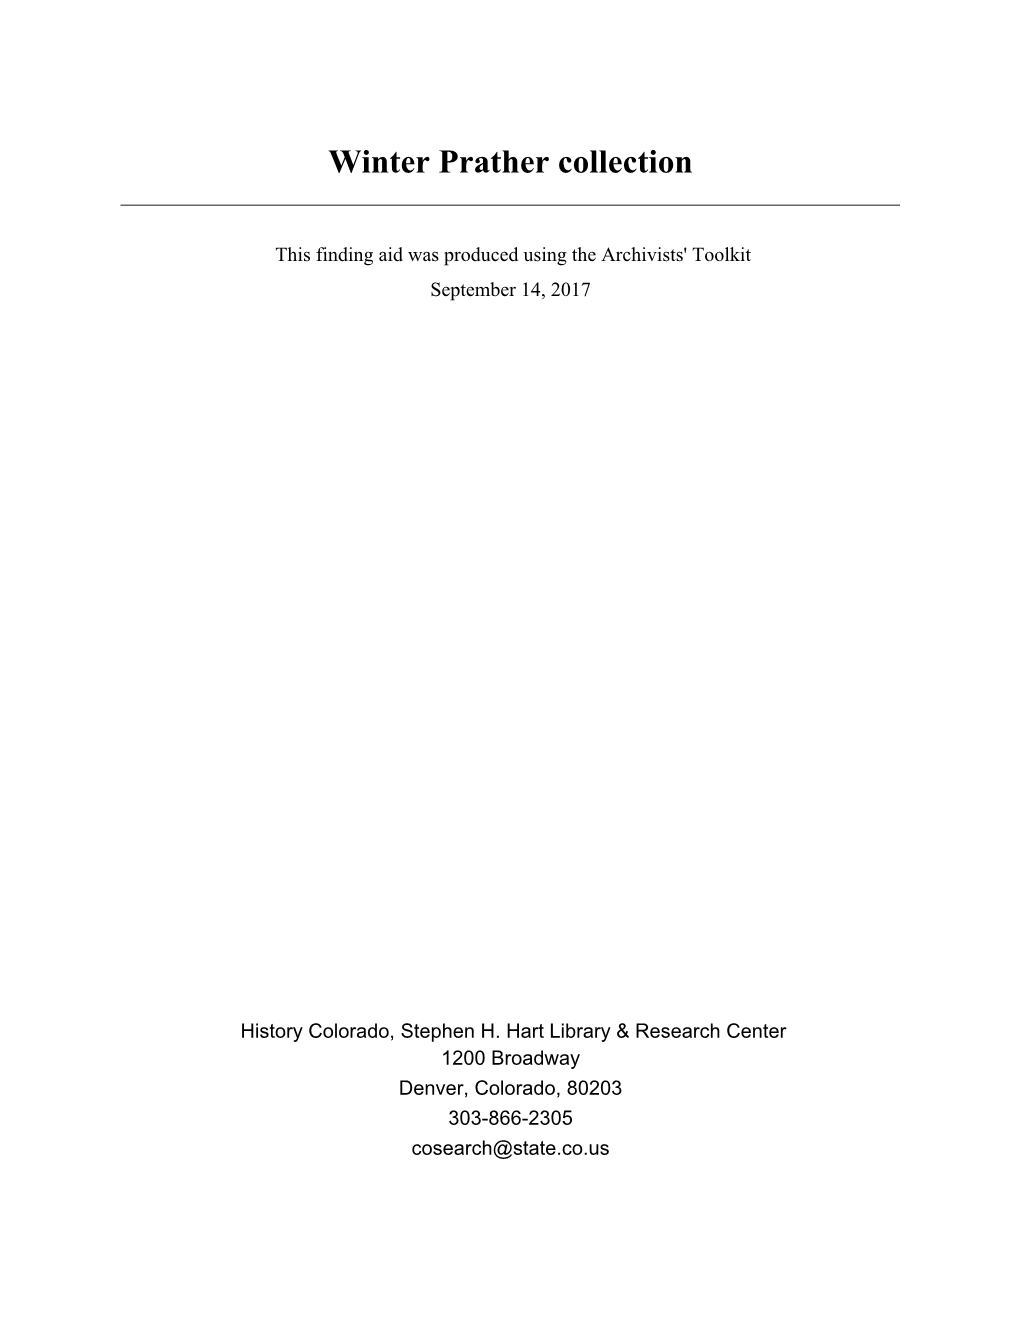 Winter Prather Collection